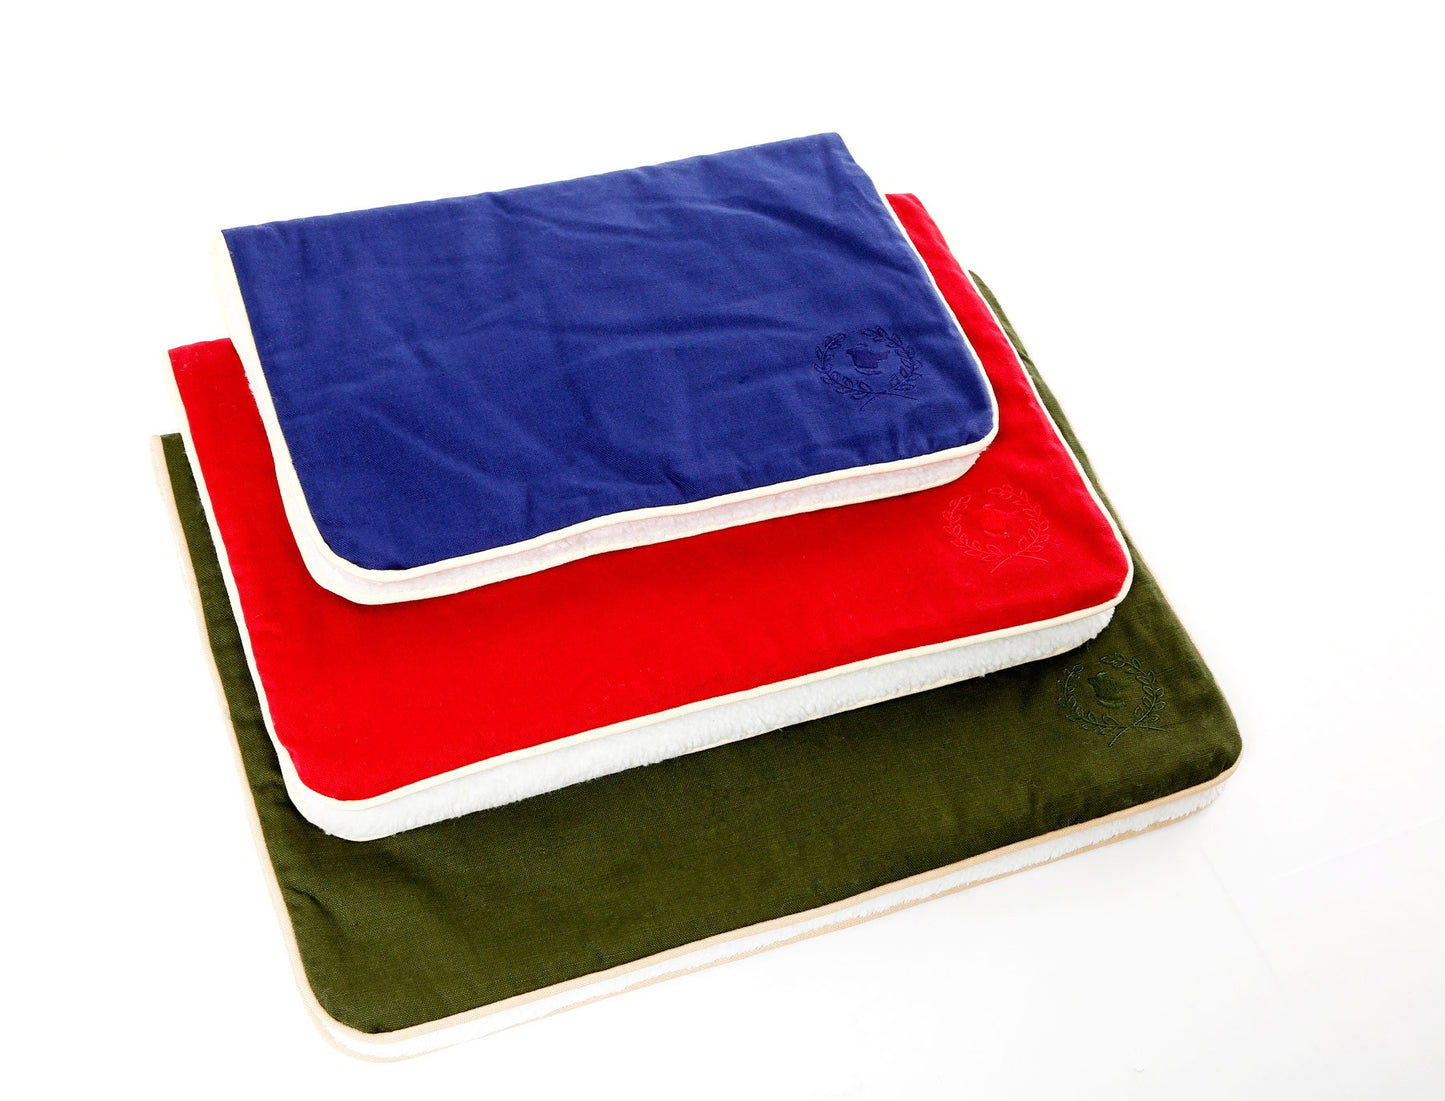 Canine Styles - Crate Mat - Solid Colored w/Off White Piping Cotton Canvas - Dog Bed, 5 Colors